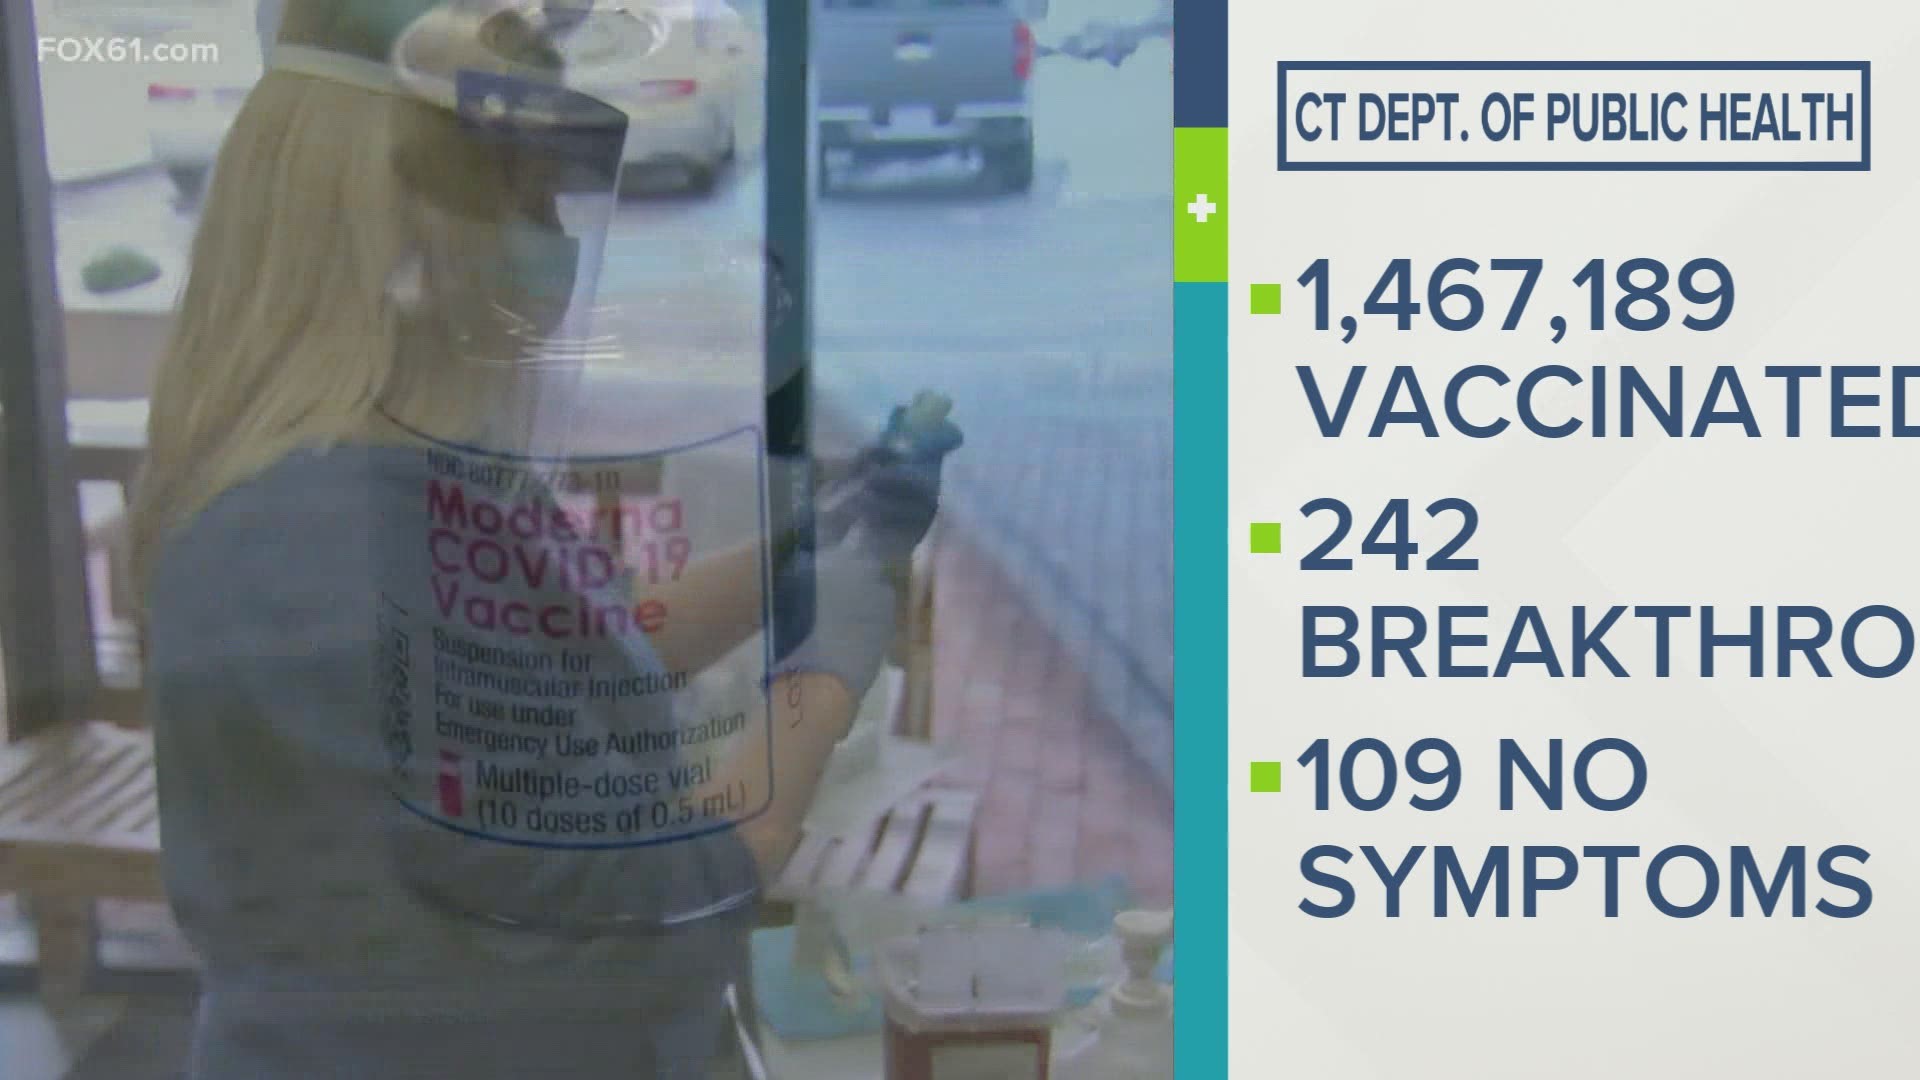 The CT DPH says data shows that out of the 1.4 million people fully vaccinated in the state, only 242 later became infected with COVID-19.